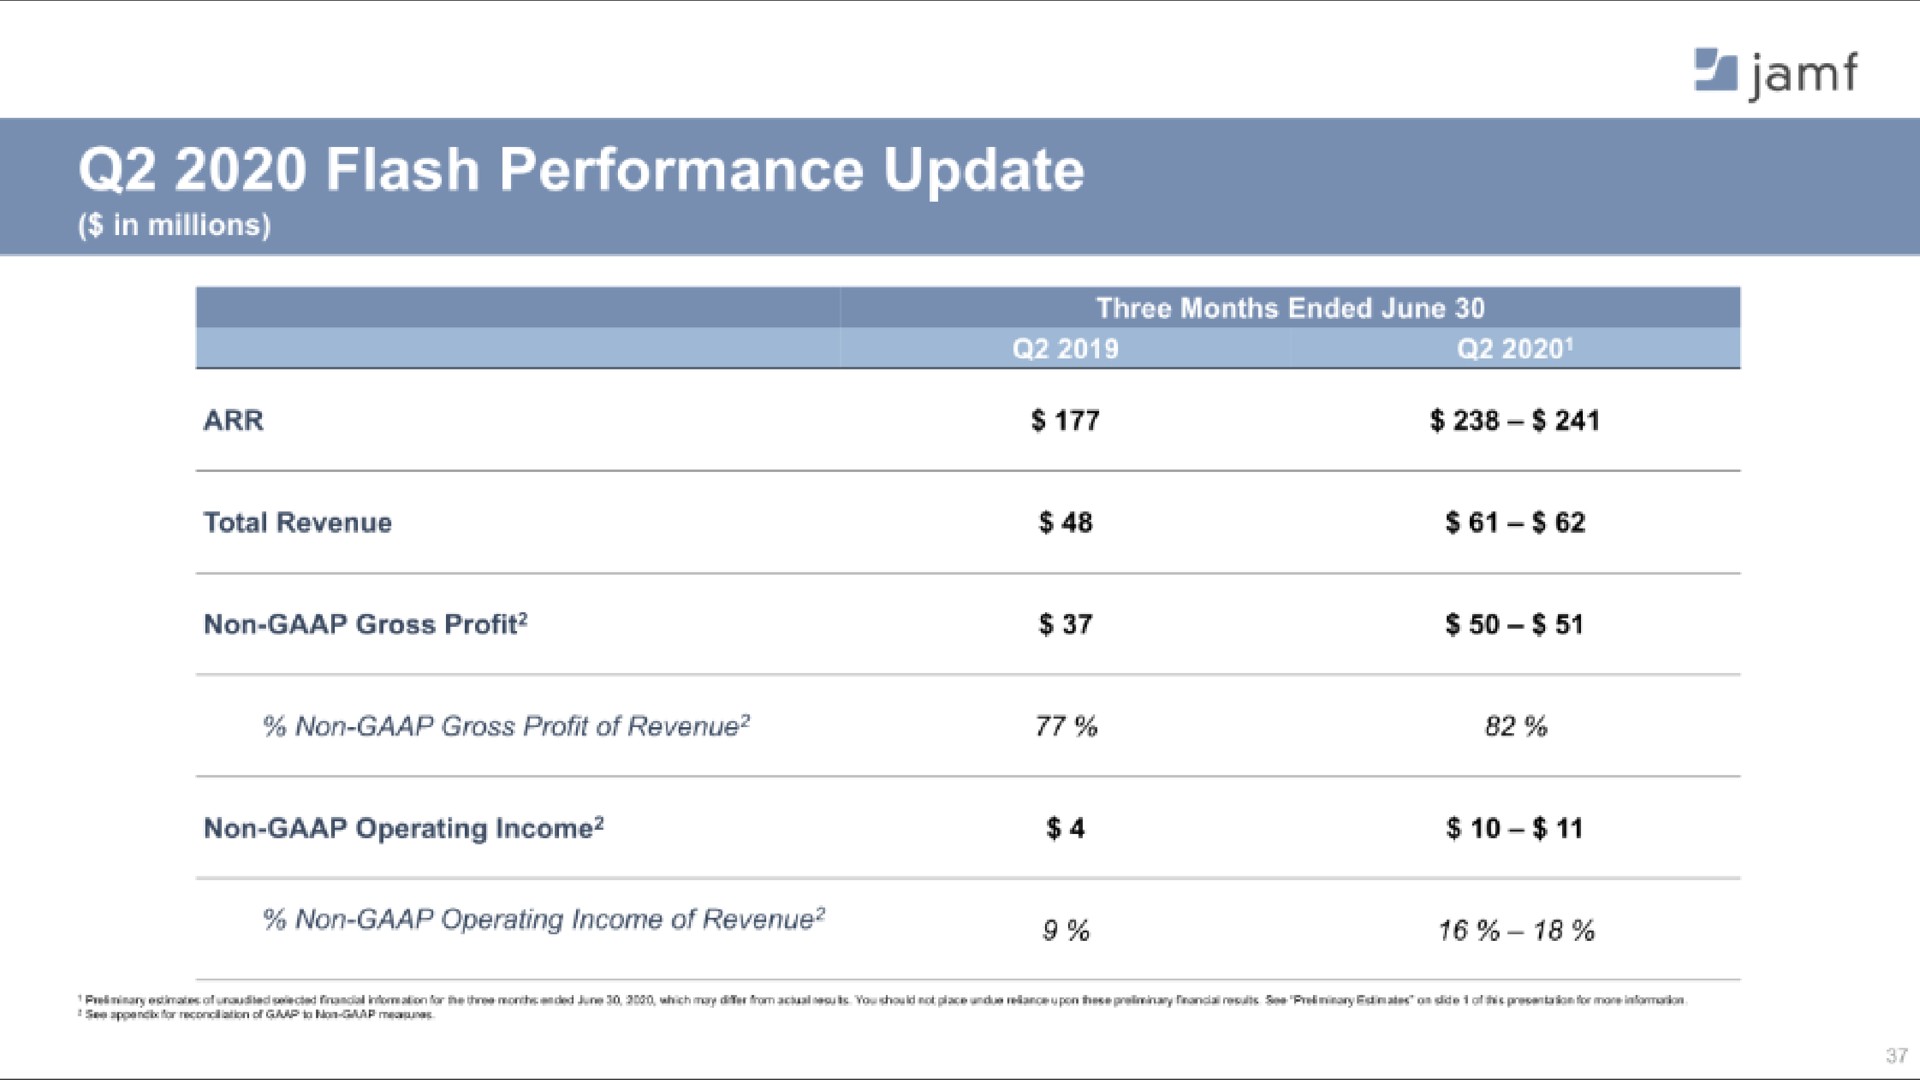 a flash performance update | Jamf